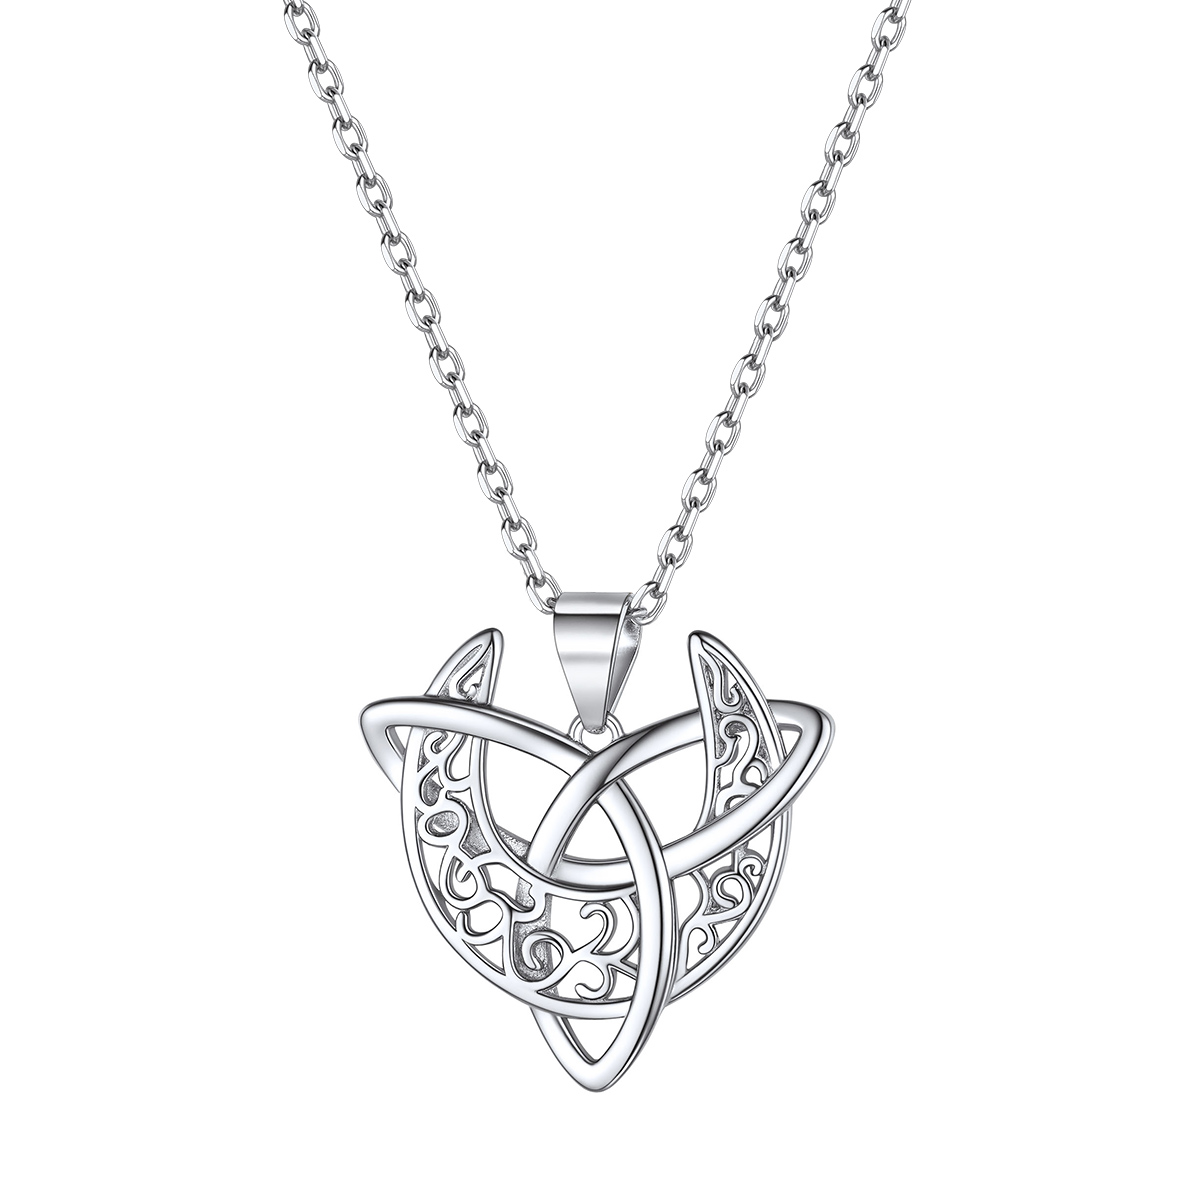 Sterling Silver Crescent Moon Necklace Celtic Triquetra Knot Necklace